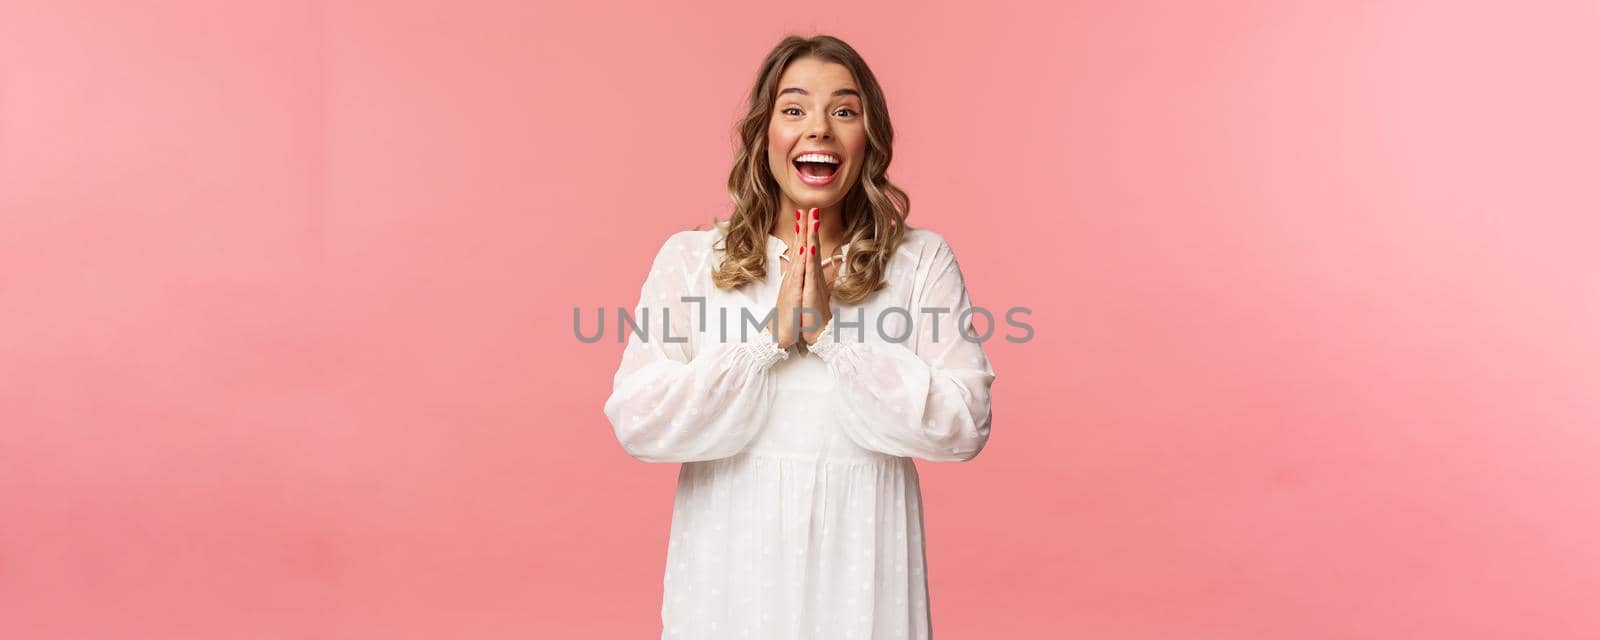 Enthusiastic and excited, happy emotive blond girl applause, clasping hands in thrill and amazement as seeing something really wonderful and cool, smiling as dream came true, pink background.